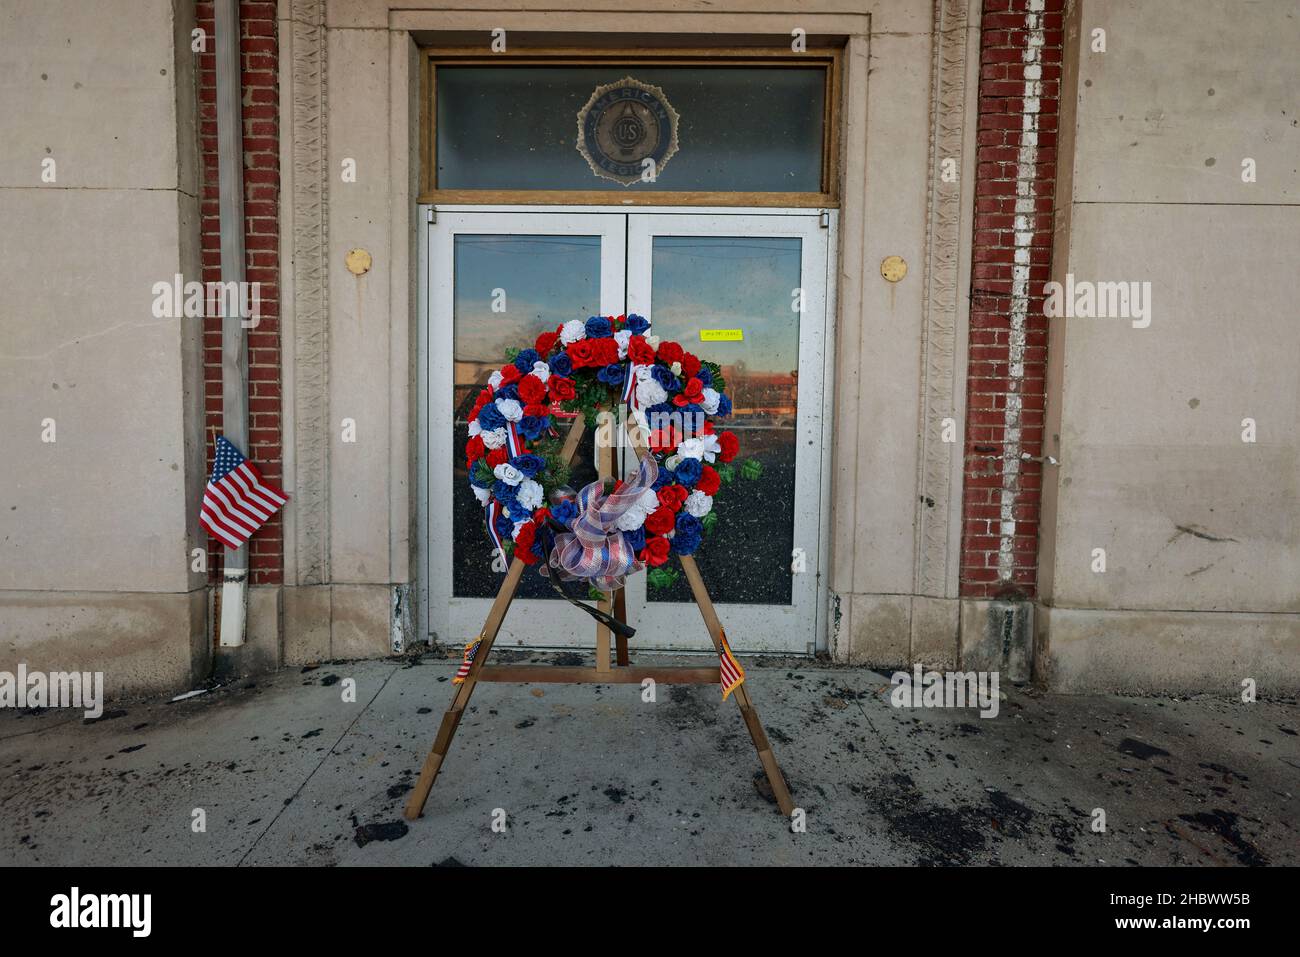 MAYFIELD, KENTUCKY - DECEMBER 20:  POWMIA wreath place at the entrance to the tornado damaged American Legion building, on December 20, 2021 in Mayfield, Kentucky.  Multiple nighttime tornadoes struck several Midwest states on December 10, causing widespread destruction and multiple casualties. Stock Photo